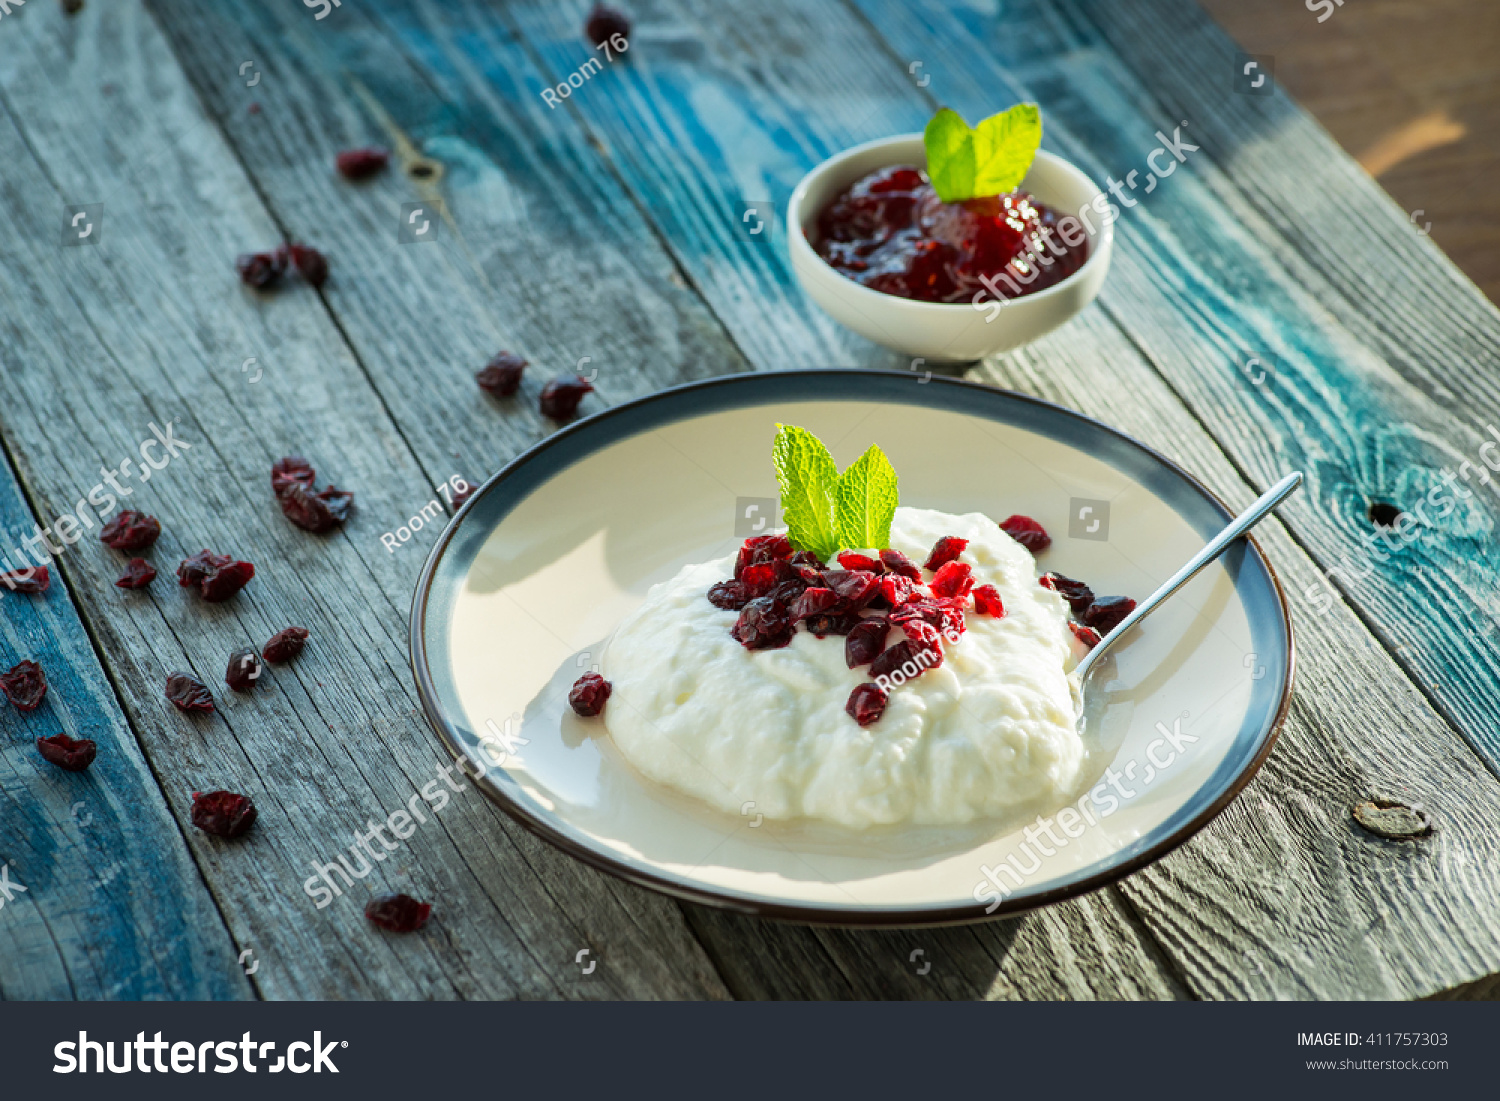 Plate with fresh yogurt on rustic wooden table #411757303